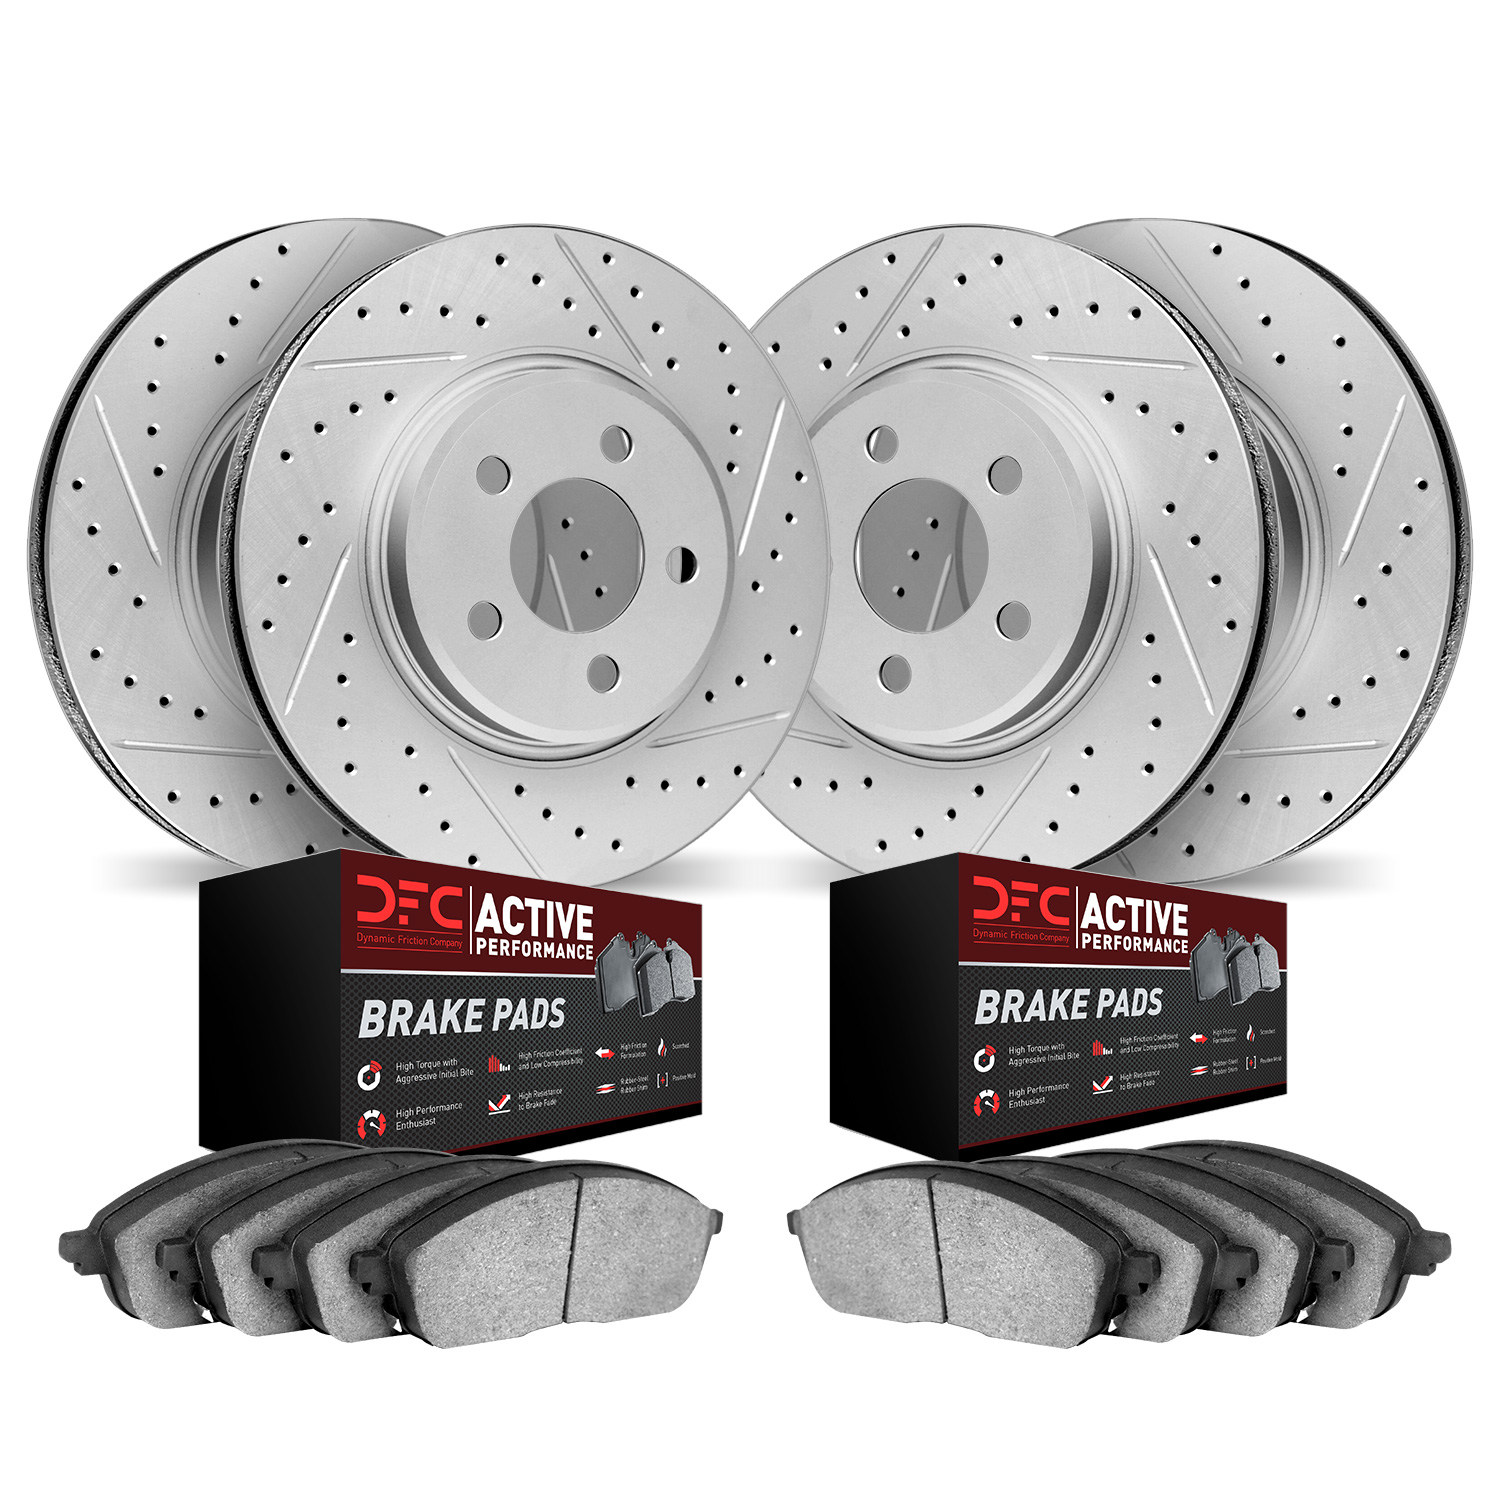 2704-02009 Geoperformance Drilled/Slotted Brake Rotors with Active Performance Pads Kit, 1997-2004 Porsche, Position: Front and